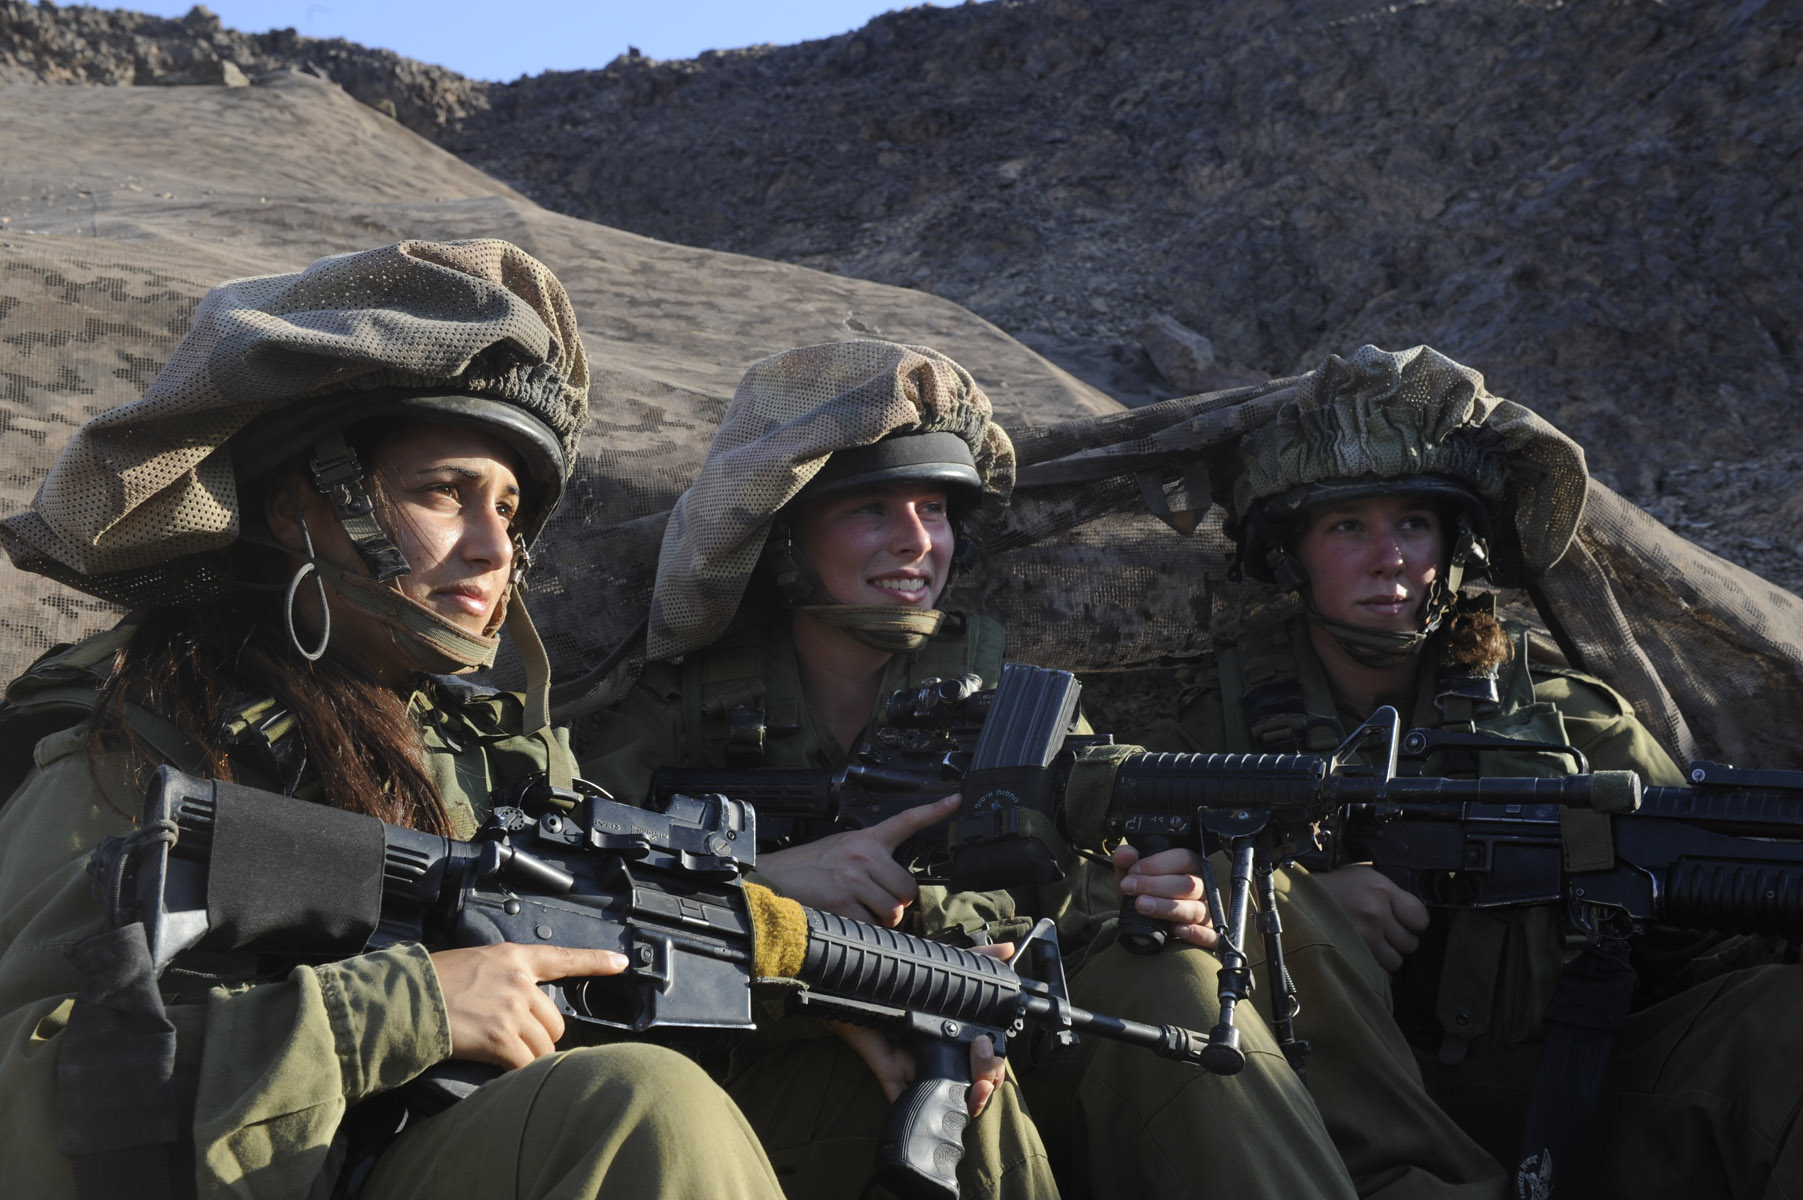 Flickr_-_Israel_Defense_Forces_-_The_Life_of_Female_Field_Intelligence_Combat_Soldiers_(3).jpg